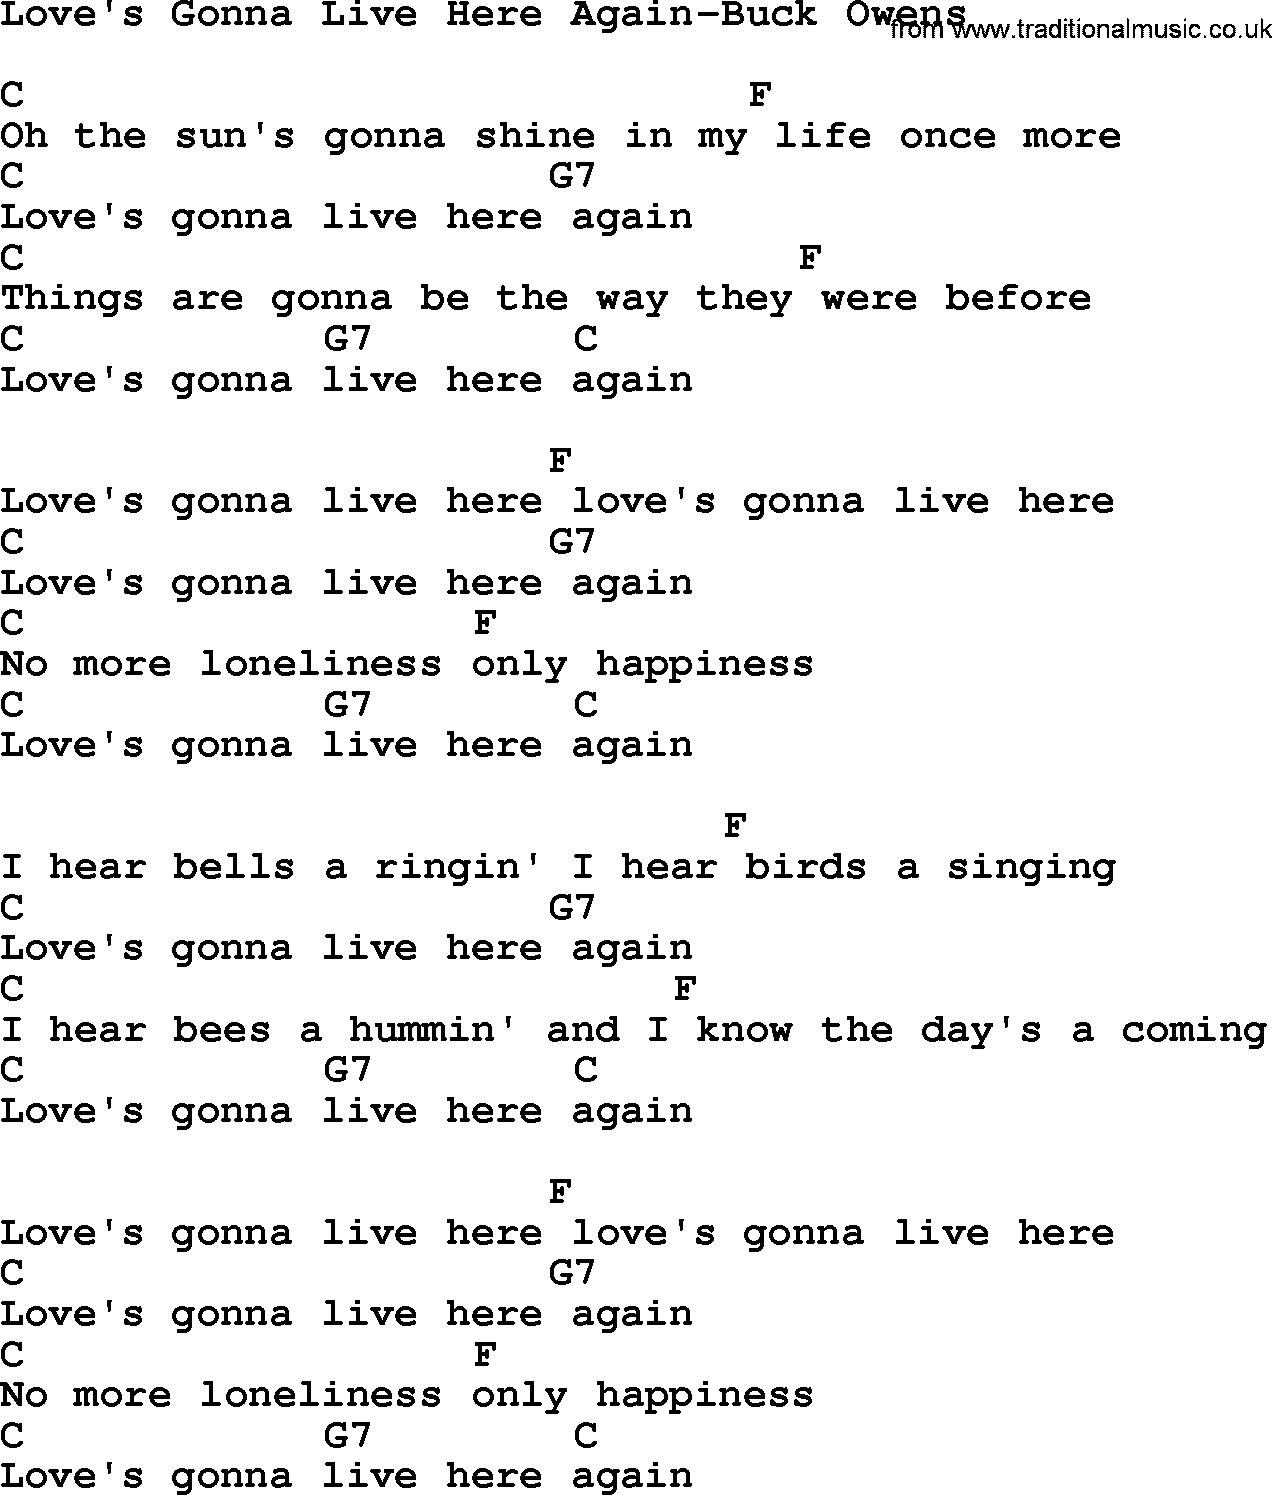 Country music song: Love's Gonna Live Here Again-Buck Owens lyrics and chords